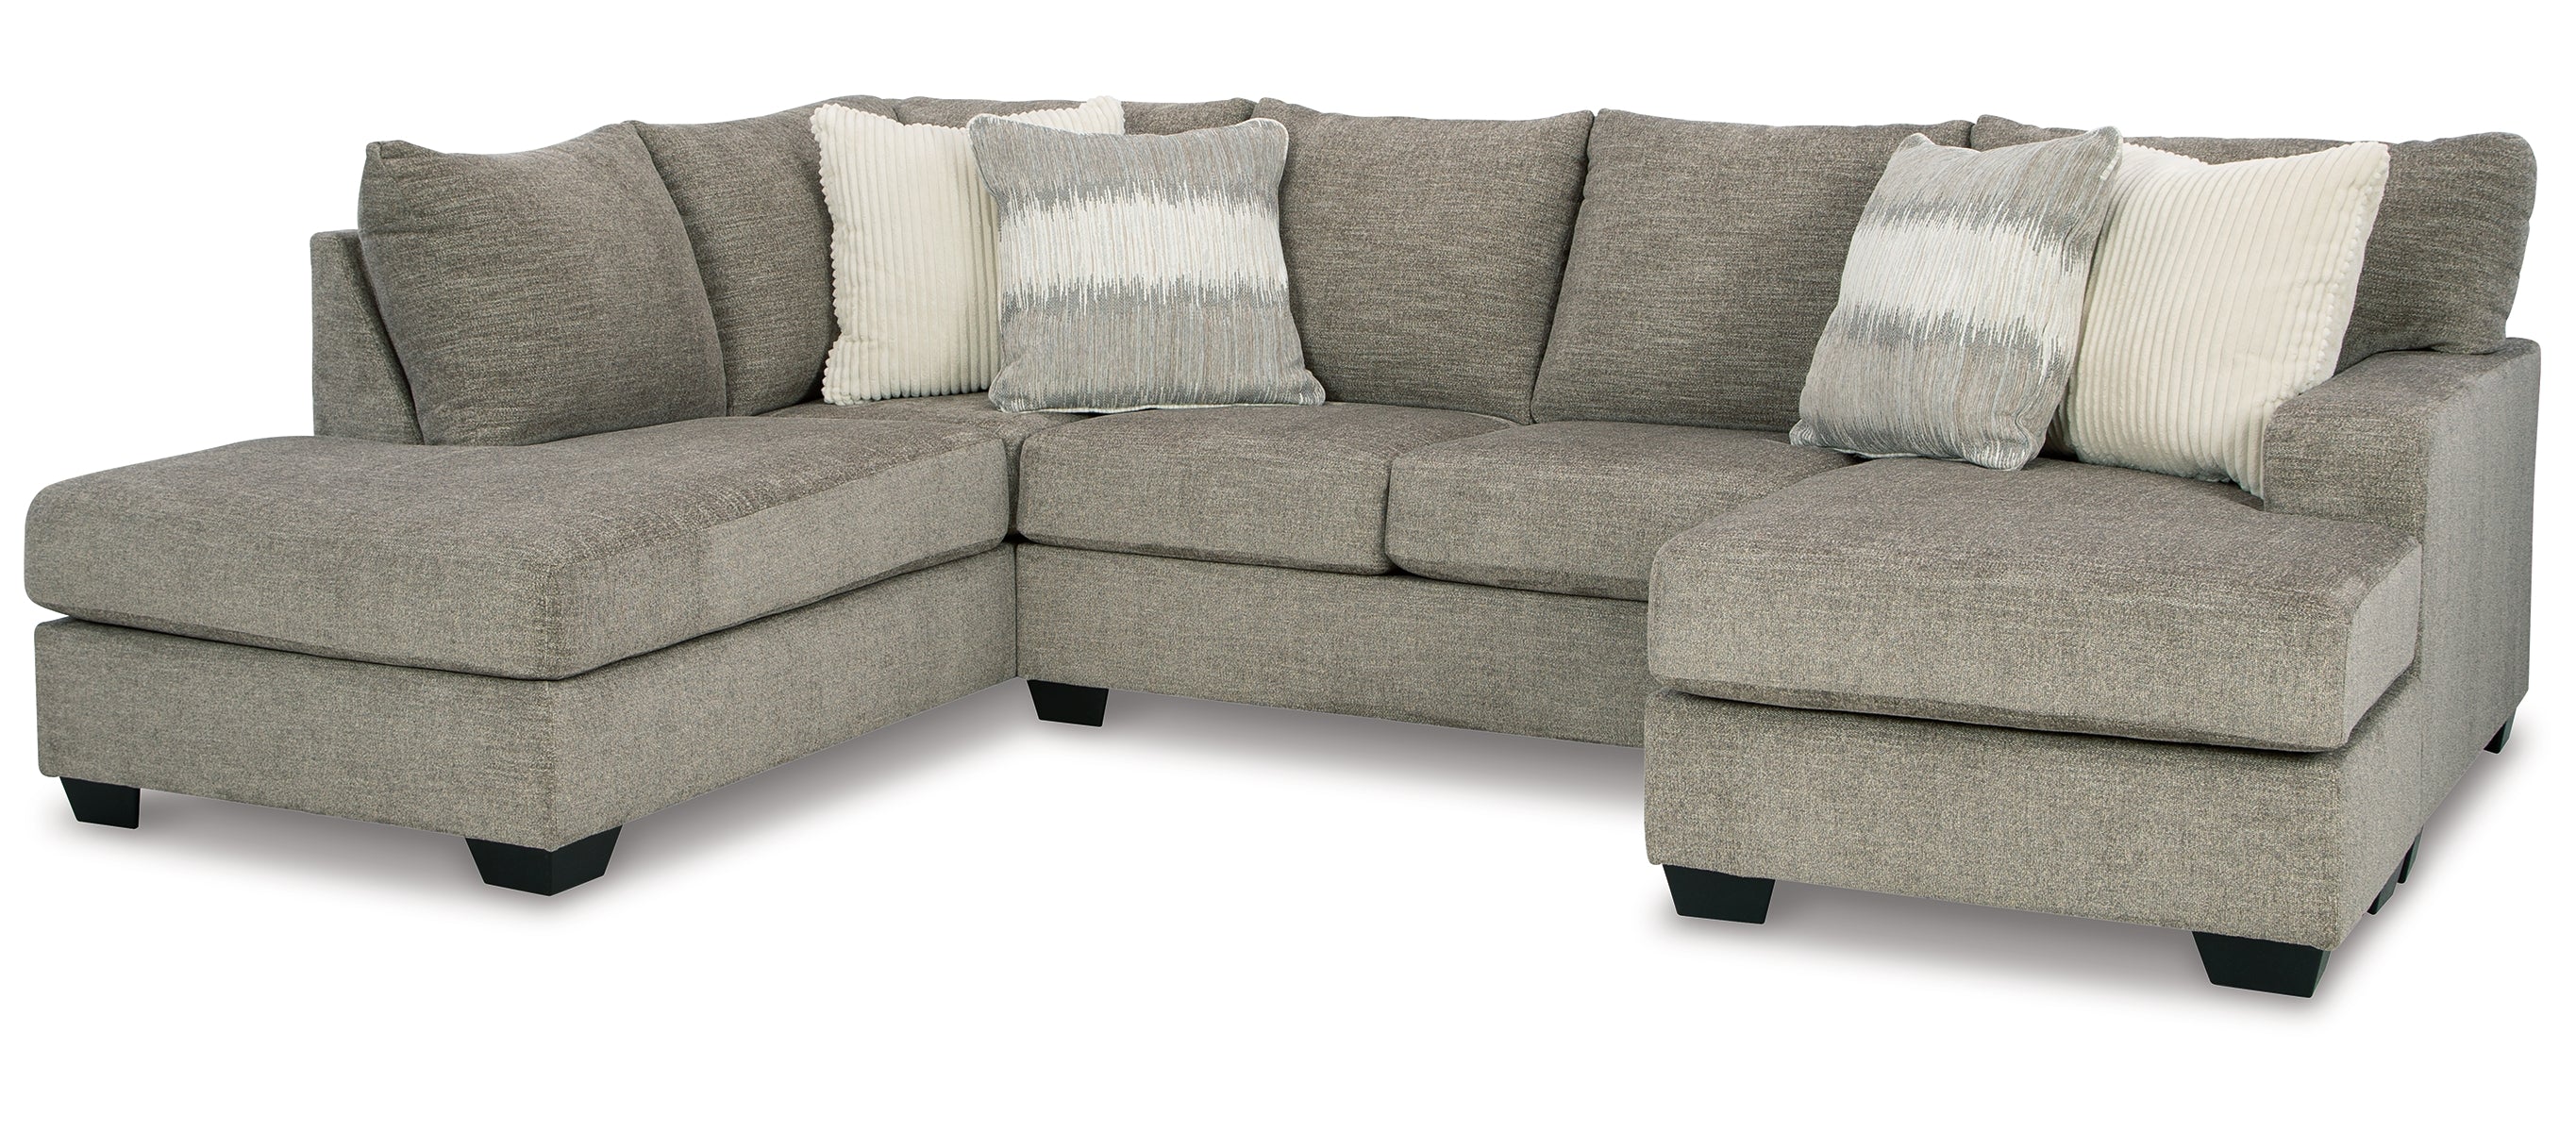 Creswell 2-Piece Sectional with Ottoman